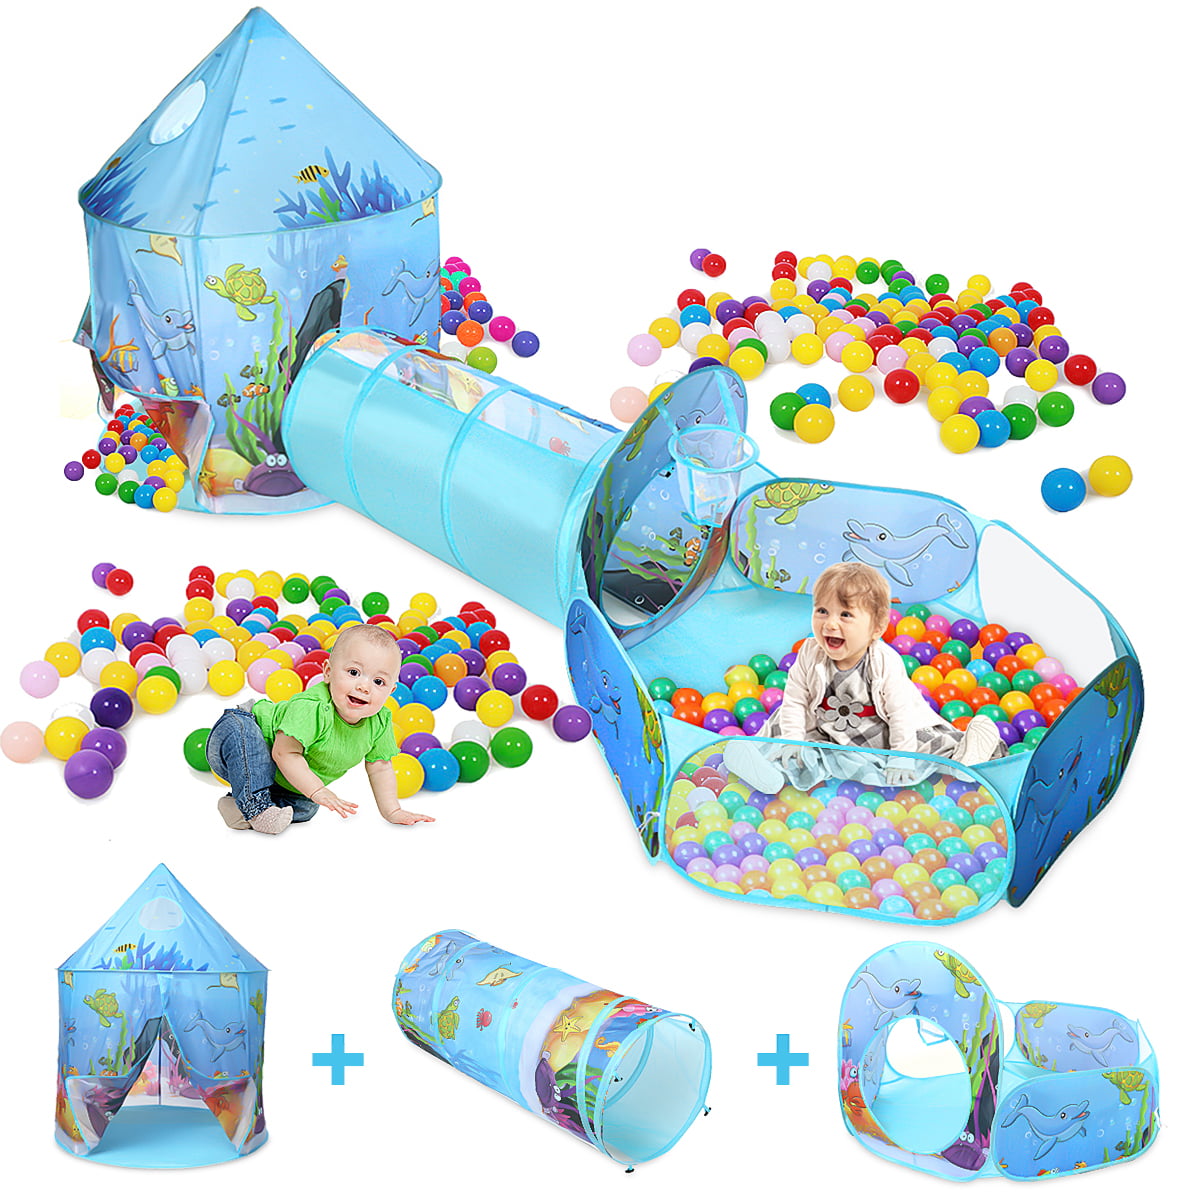 3in1 Kid Portable Tent Toy Balls Pit Pool Tunnels For Child Indoor Outdoor Gift 